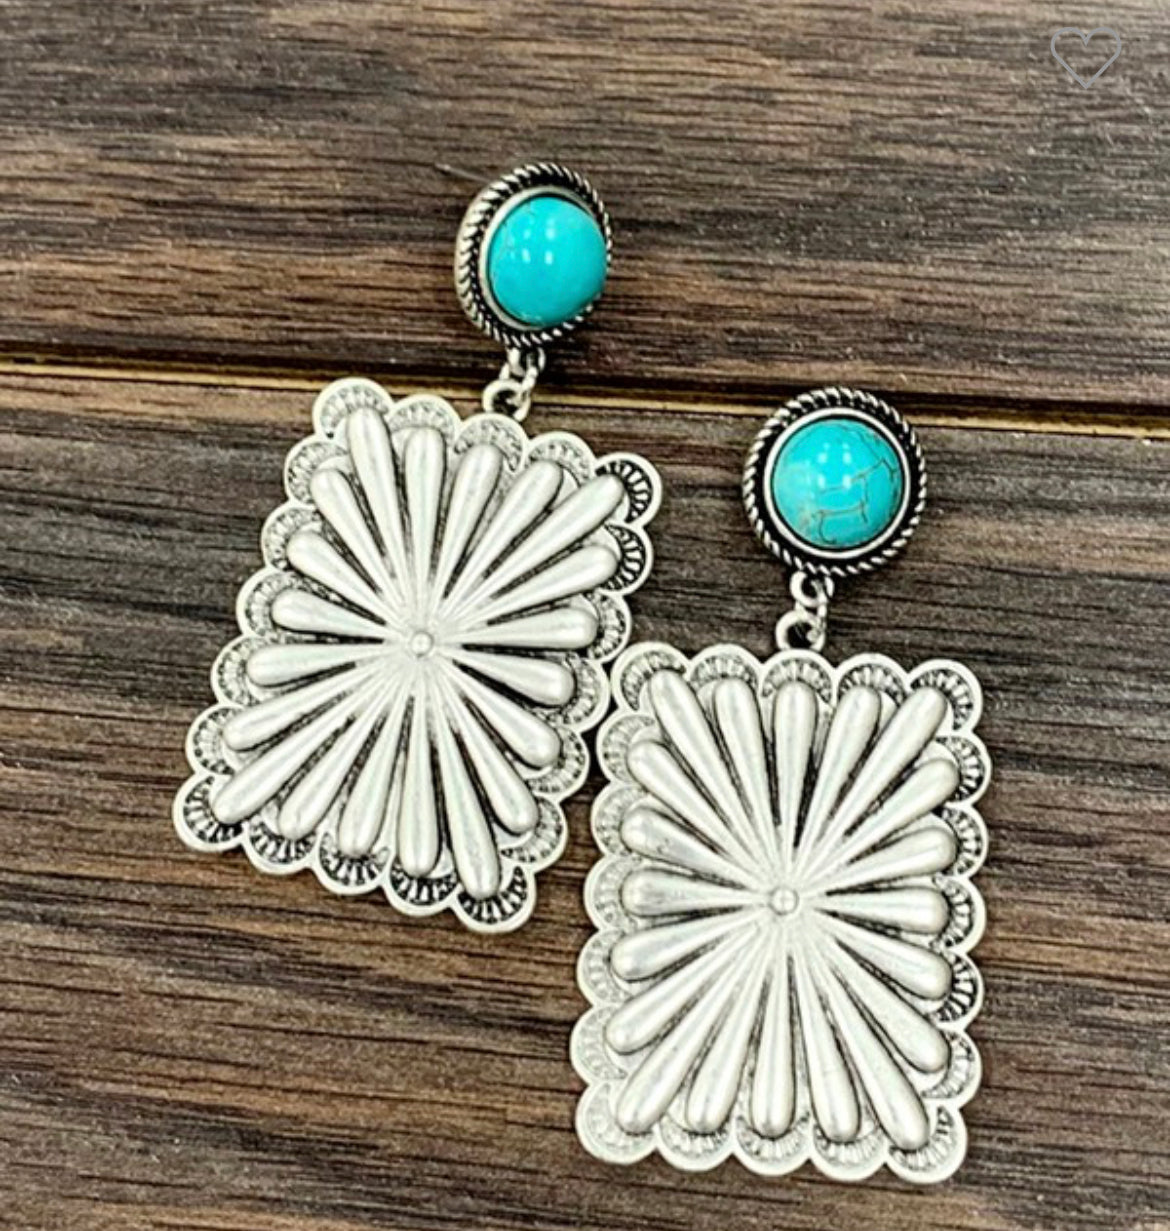 Concho Turquoise Post Earrings - 2.3. Inches long